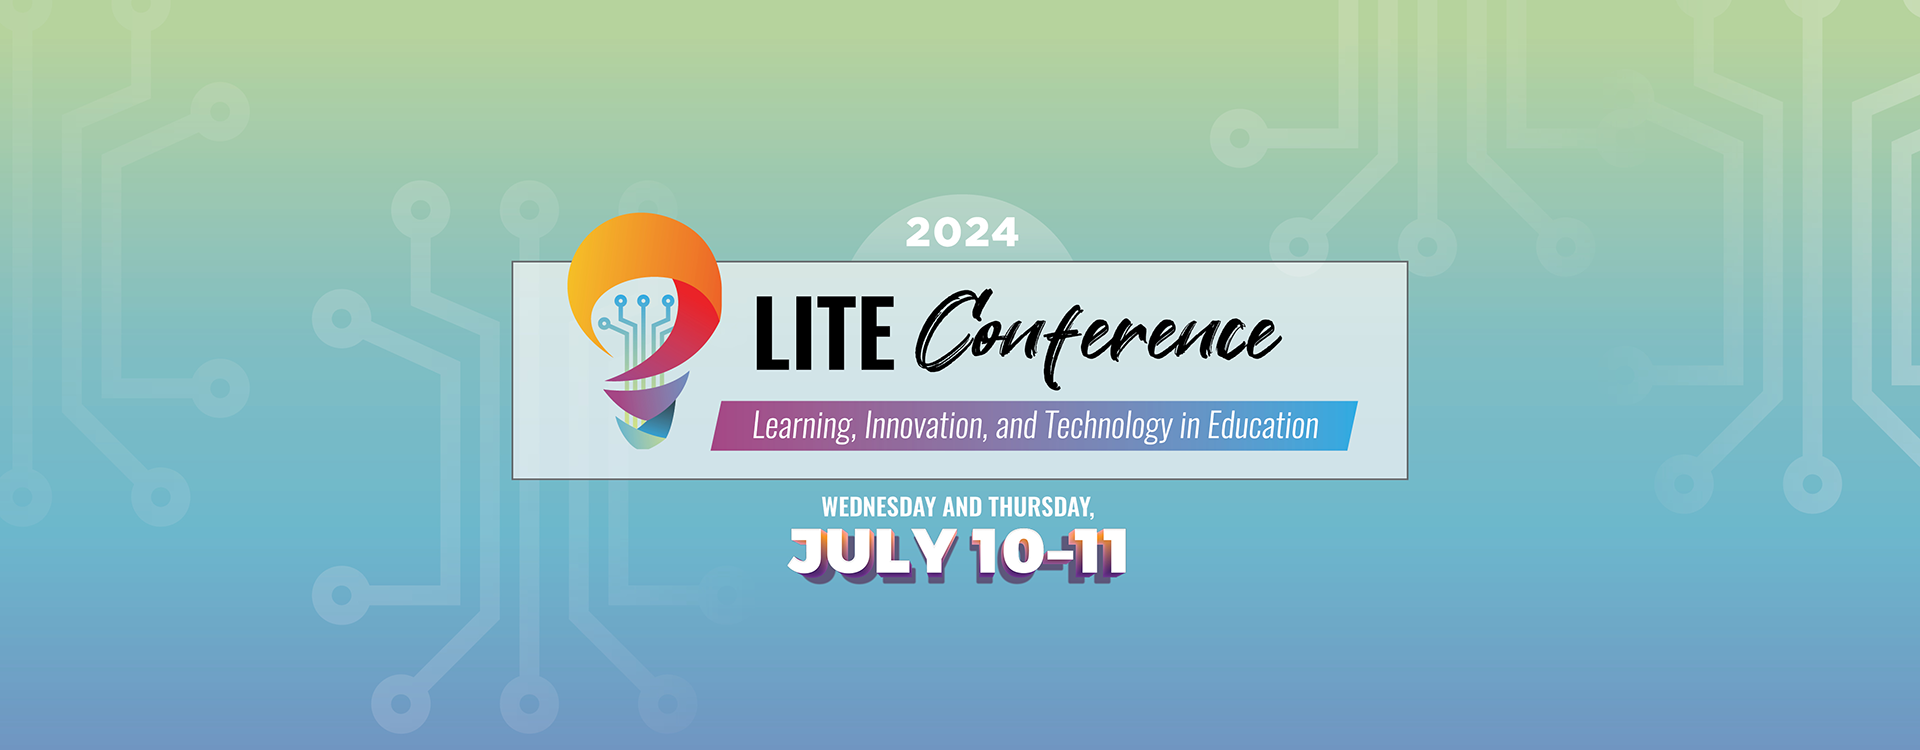 2024 LITE Conference. Learning, Innovation, and Technology in Education. July 10-11.